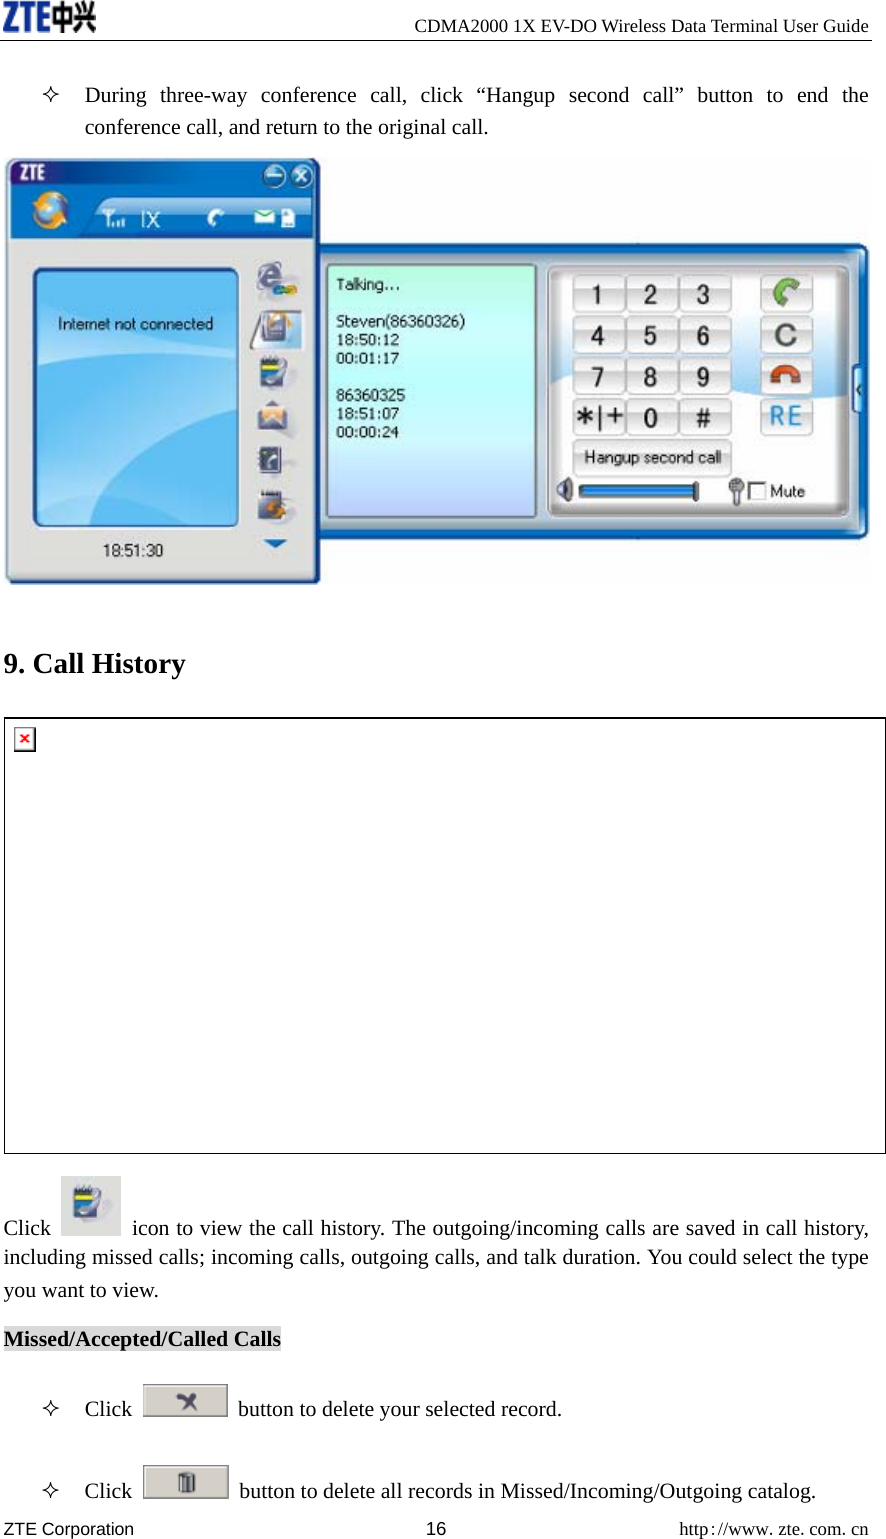     CDMA2000 1X EV-DO Wireless Data Terminal User Guide ZTE Corporation 16 http://www.zte.com.cn   During three-way conference call, click “Hangup second call” button to end the conference call, and return to the original call.  9. Call History  Click    icon to view the call history. The outgoing/incoming calls are saved in call history, including missed calls; incoming calls, outgoing calls, and talk duration. You could select the type you want to view. Missed/Accepted/Called Calls  Click    button to delete your selected record.  Click    button to delete all records in Missed/Incoming/Outgoing catalog. 